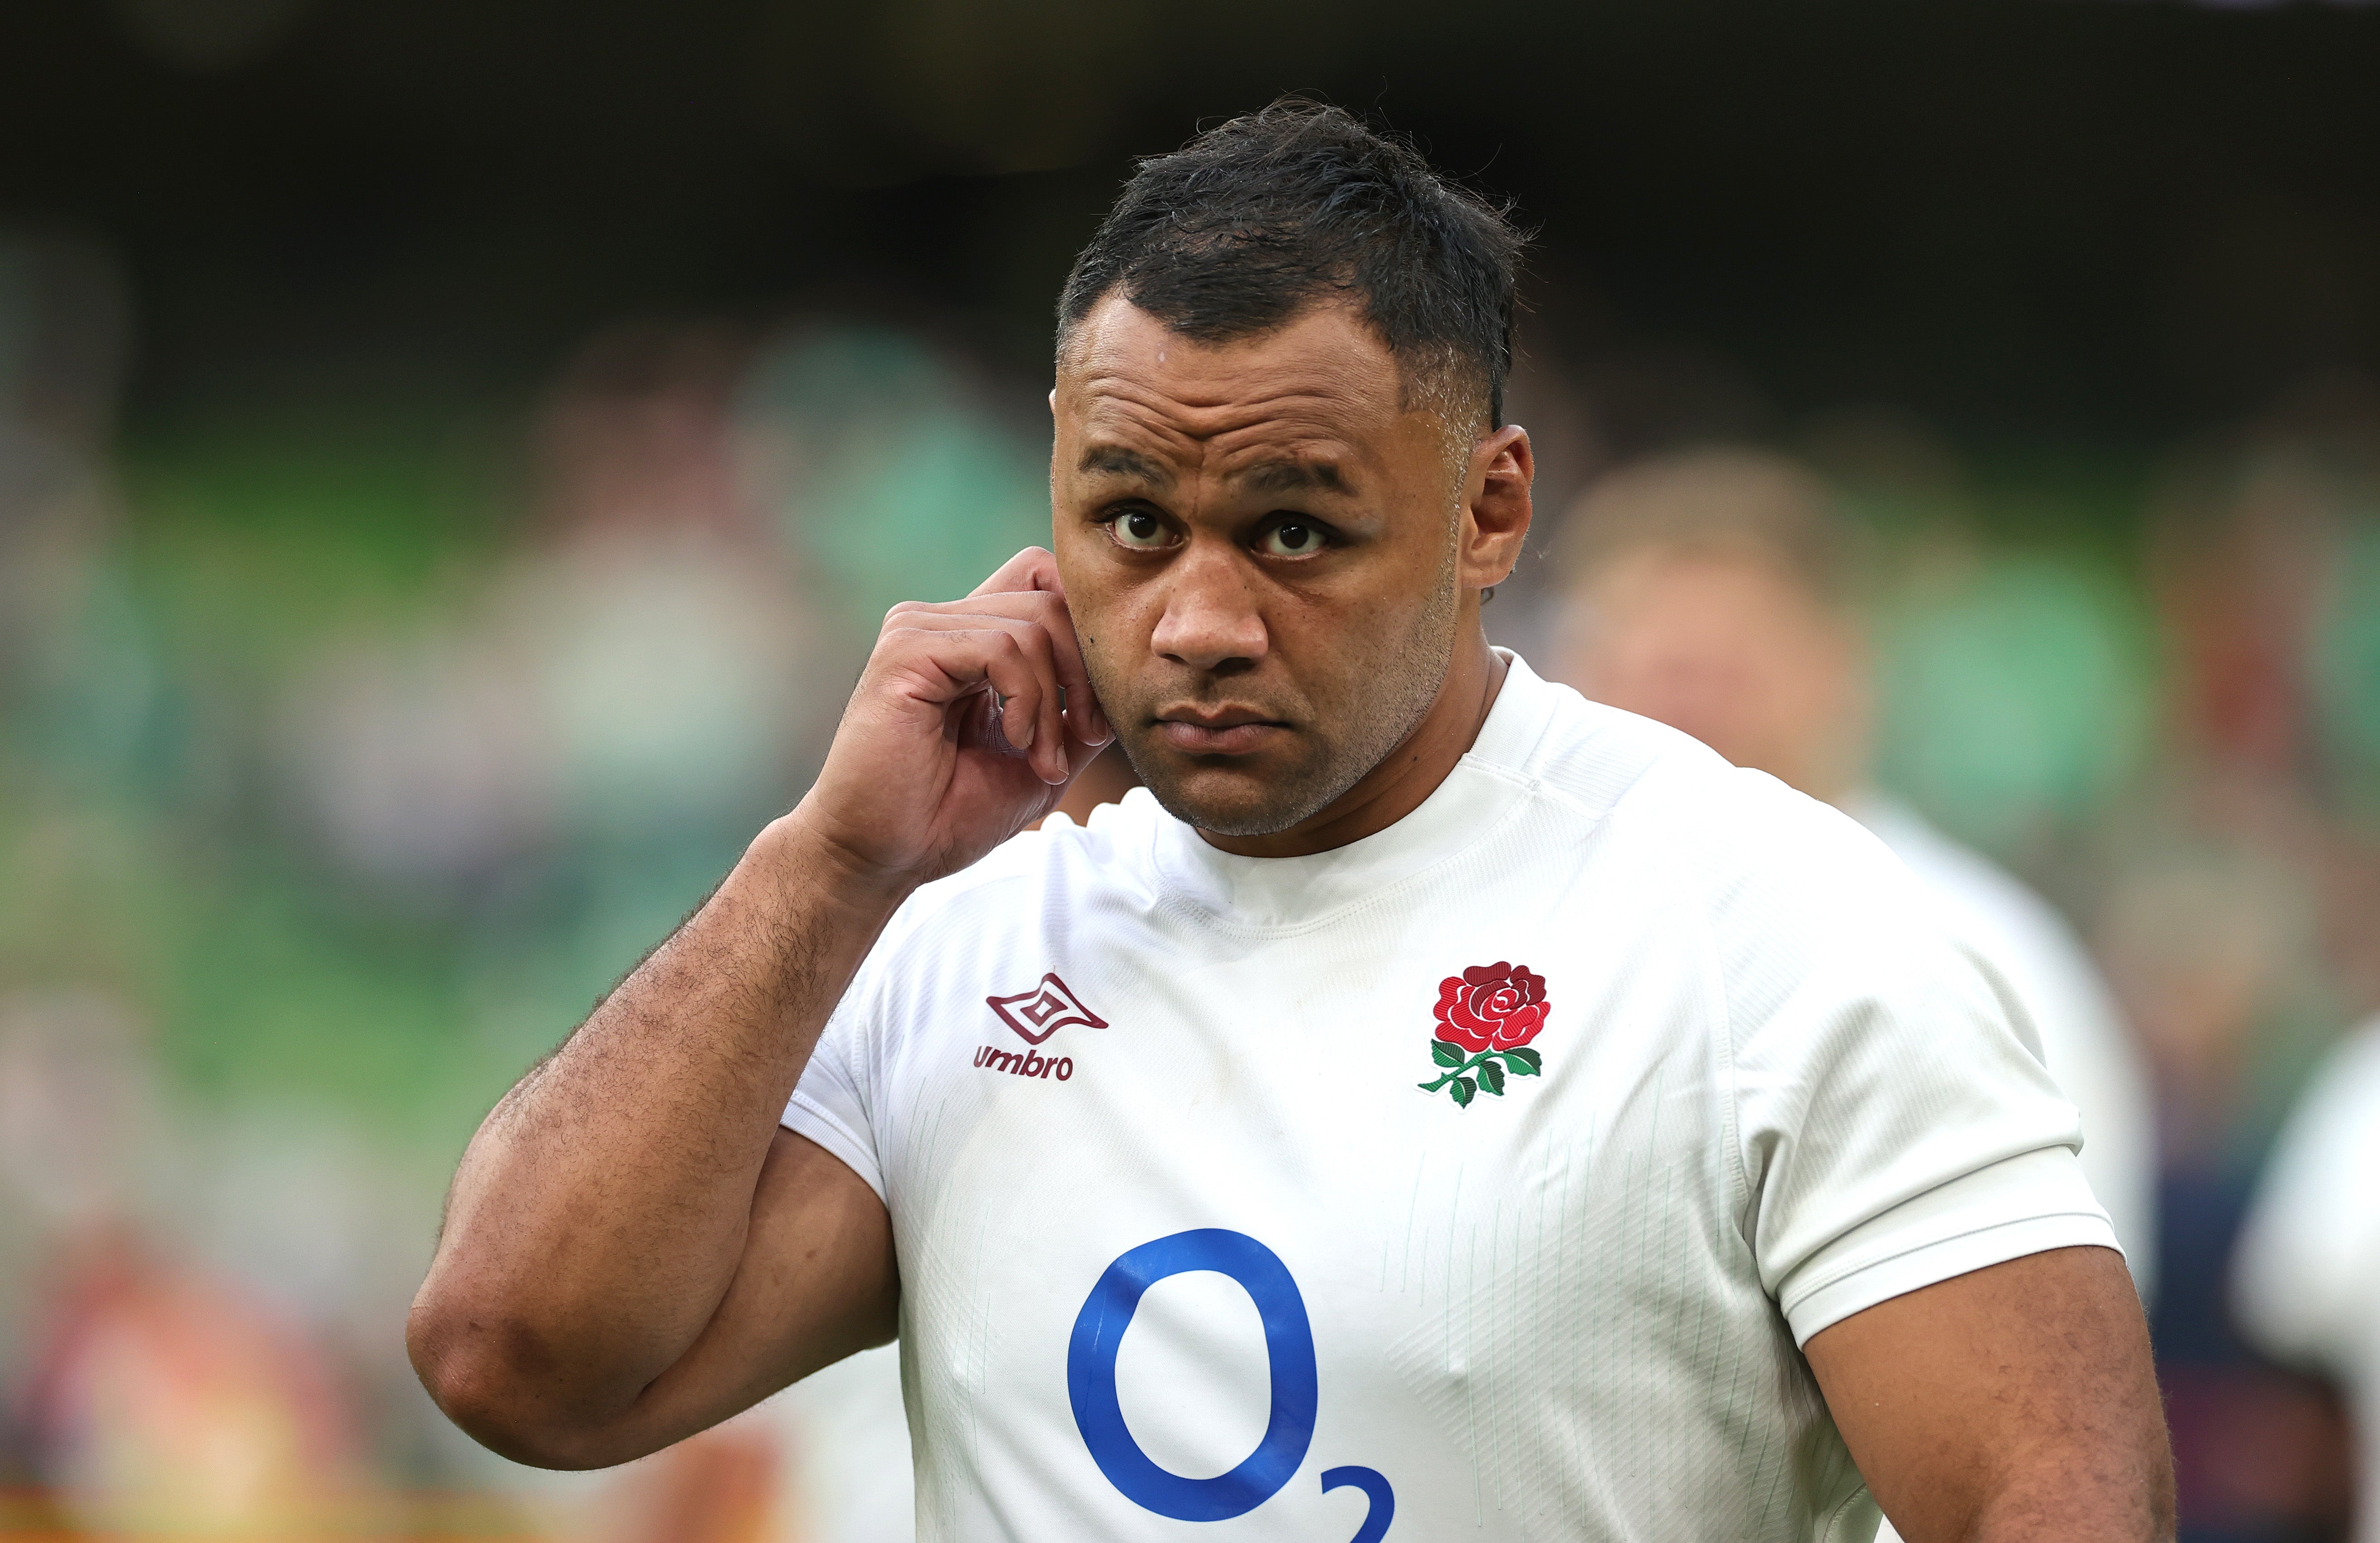 Billy Vunipola was arrested in Spain over the weekend